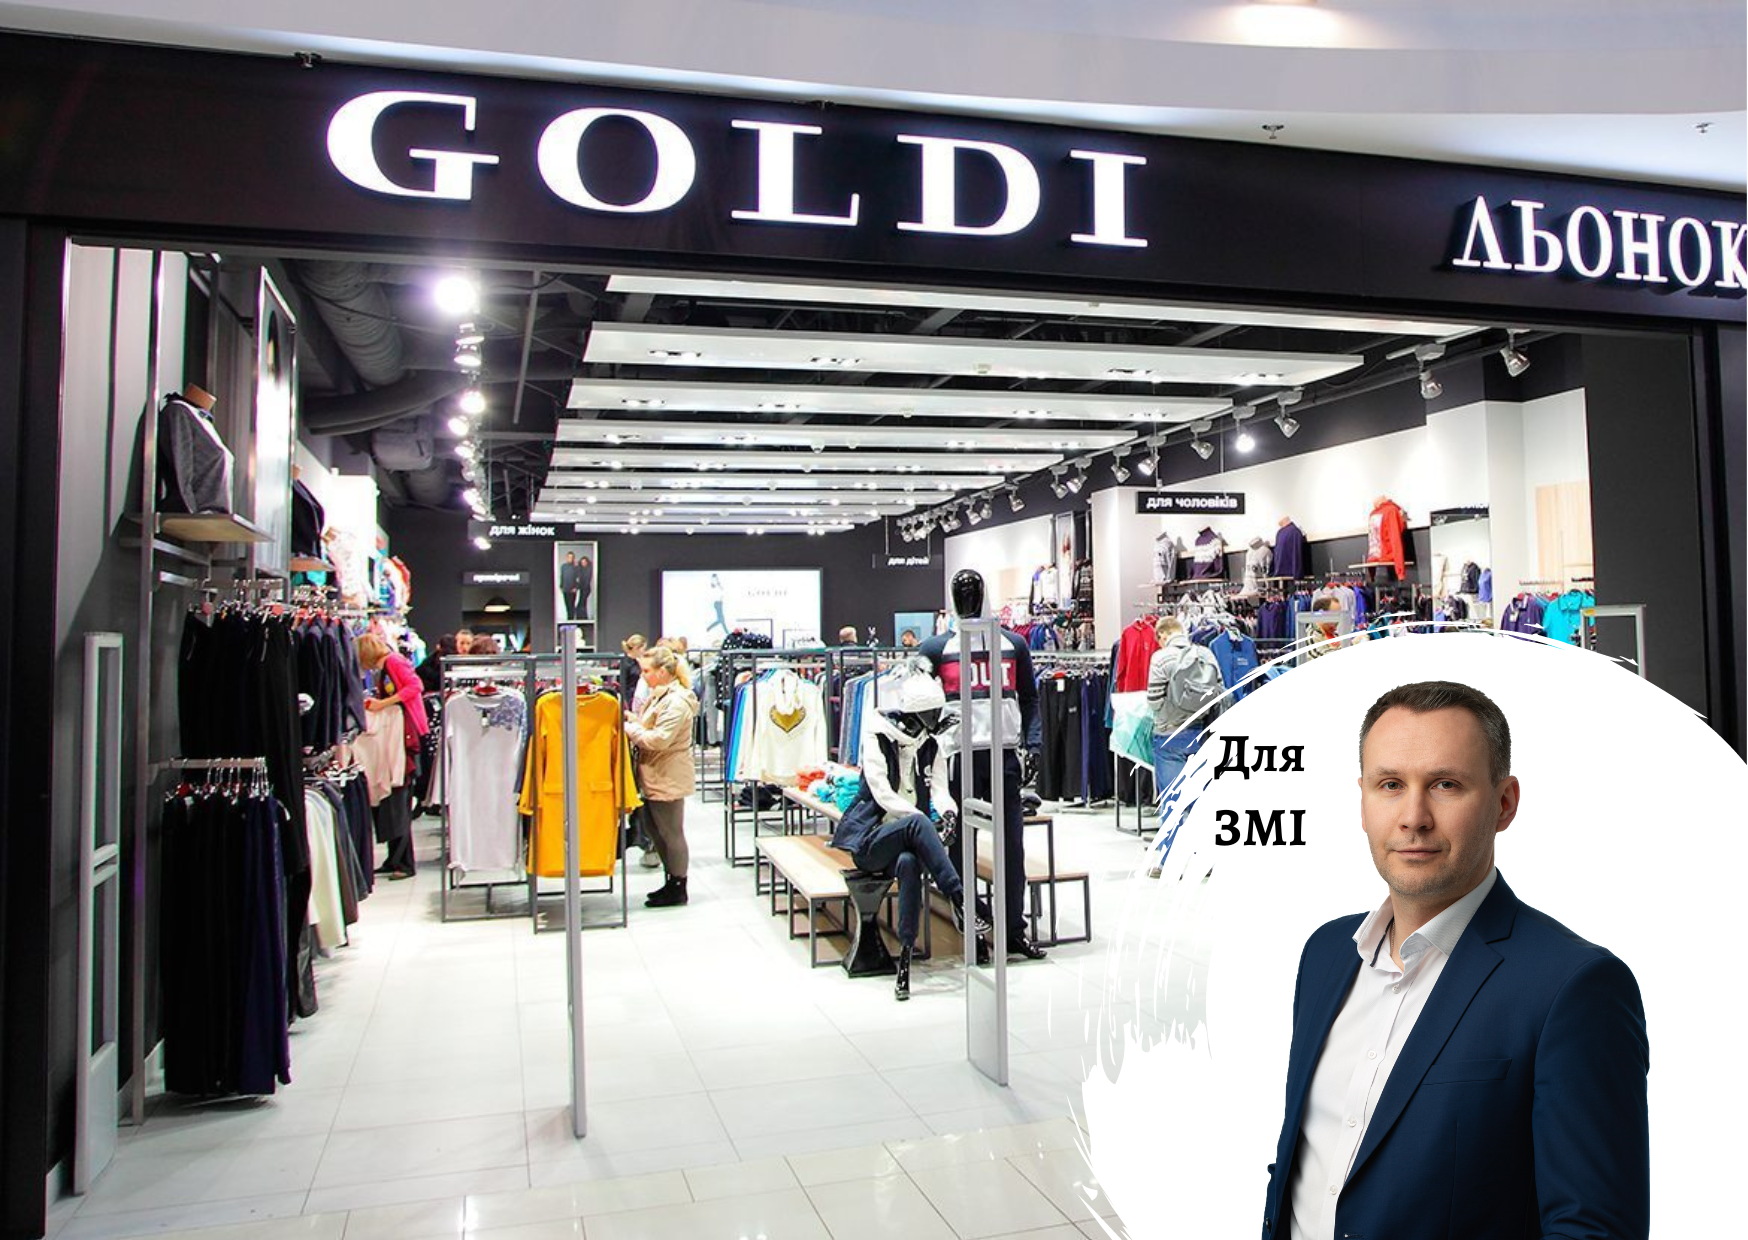 One year without Zara and H&M - comments on the fashion retail market by Pro-Consulting CEO Oleksander Sokolov. FORBES